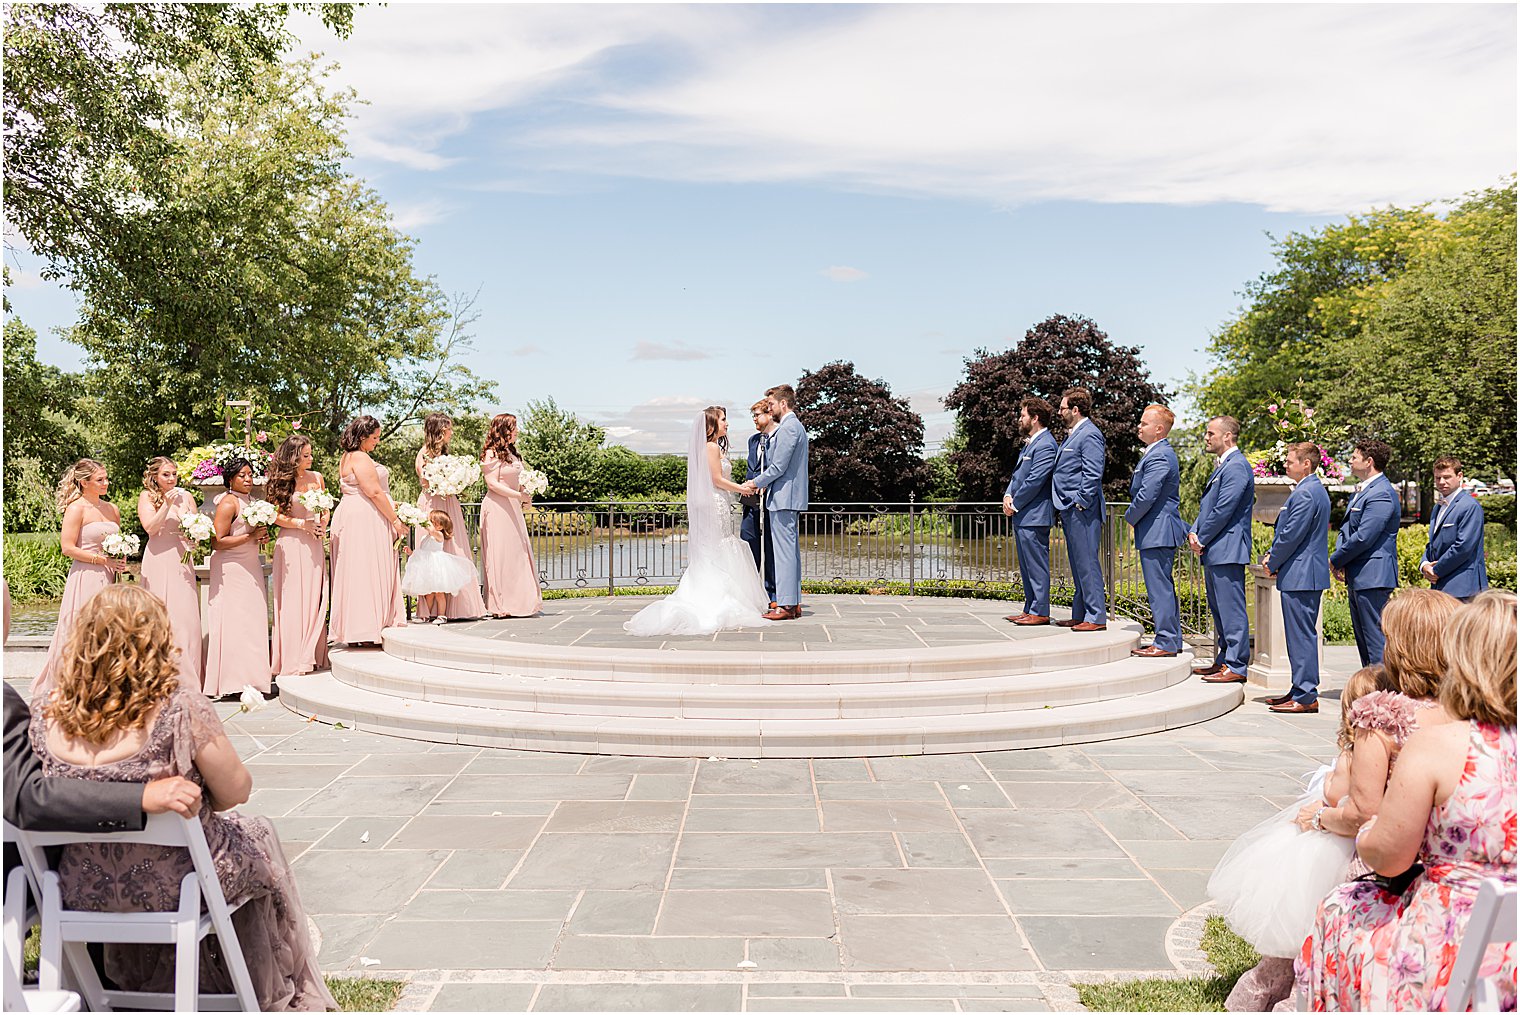 outdoor wedding ceremony in garden at Park Chateau Estate